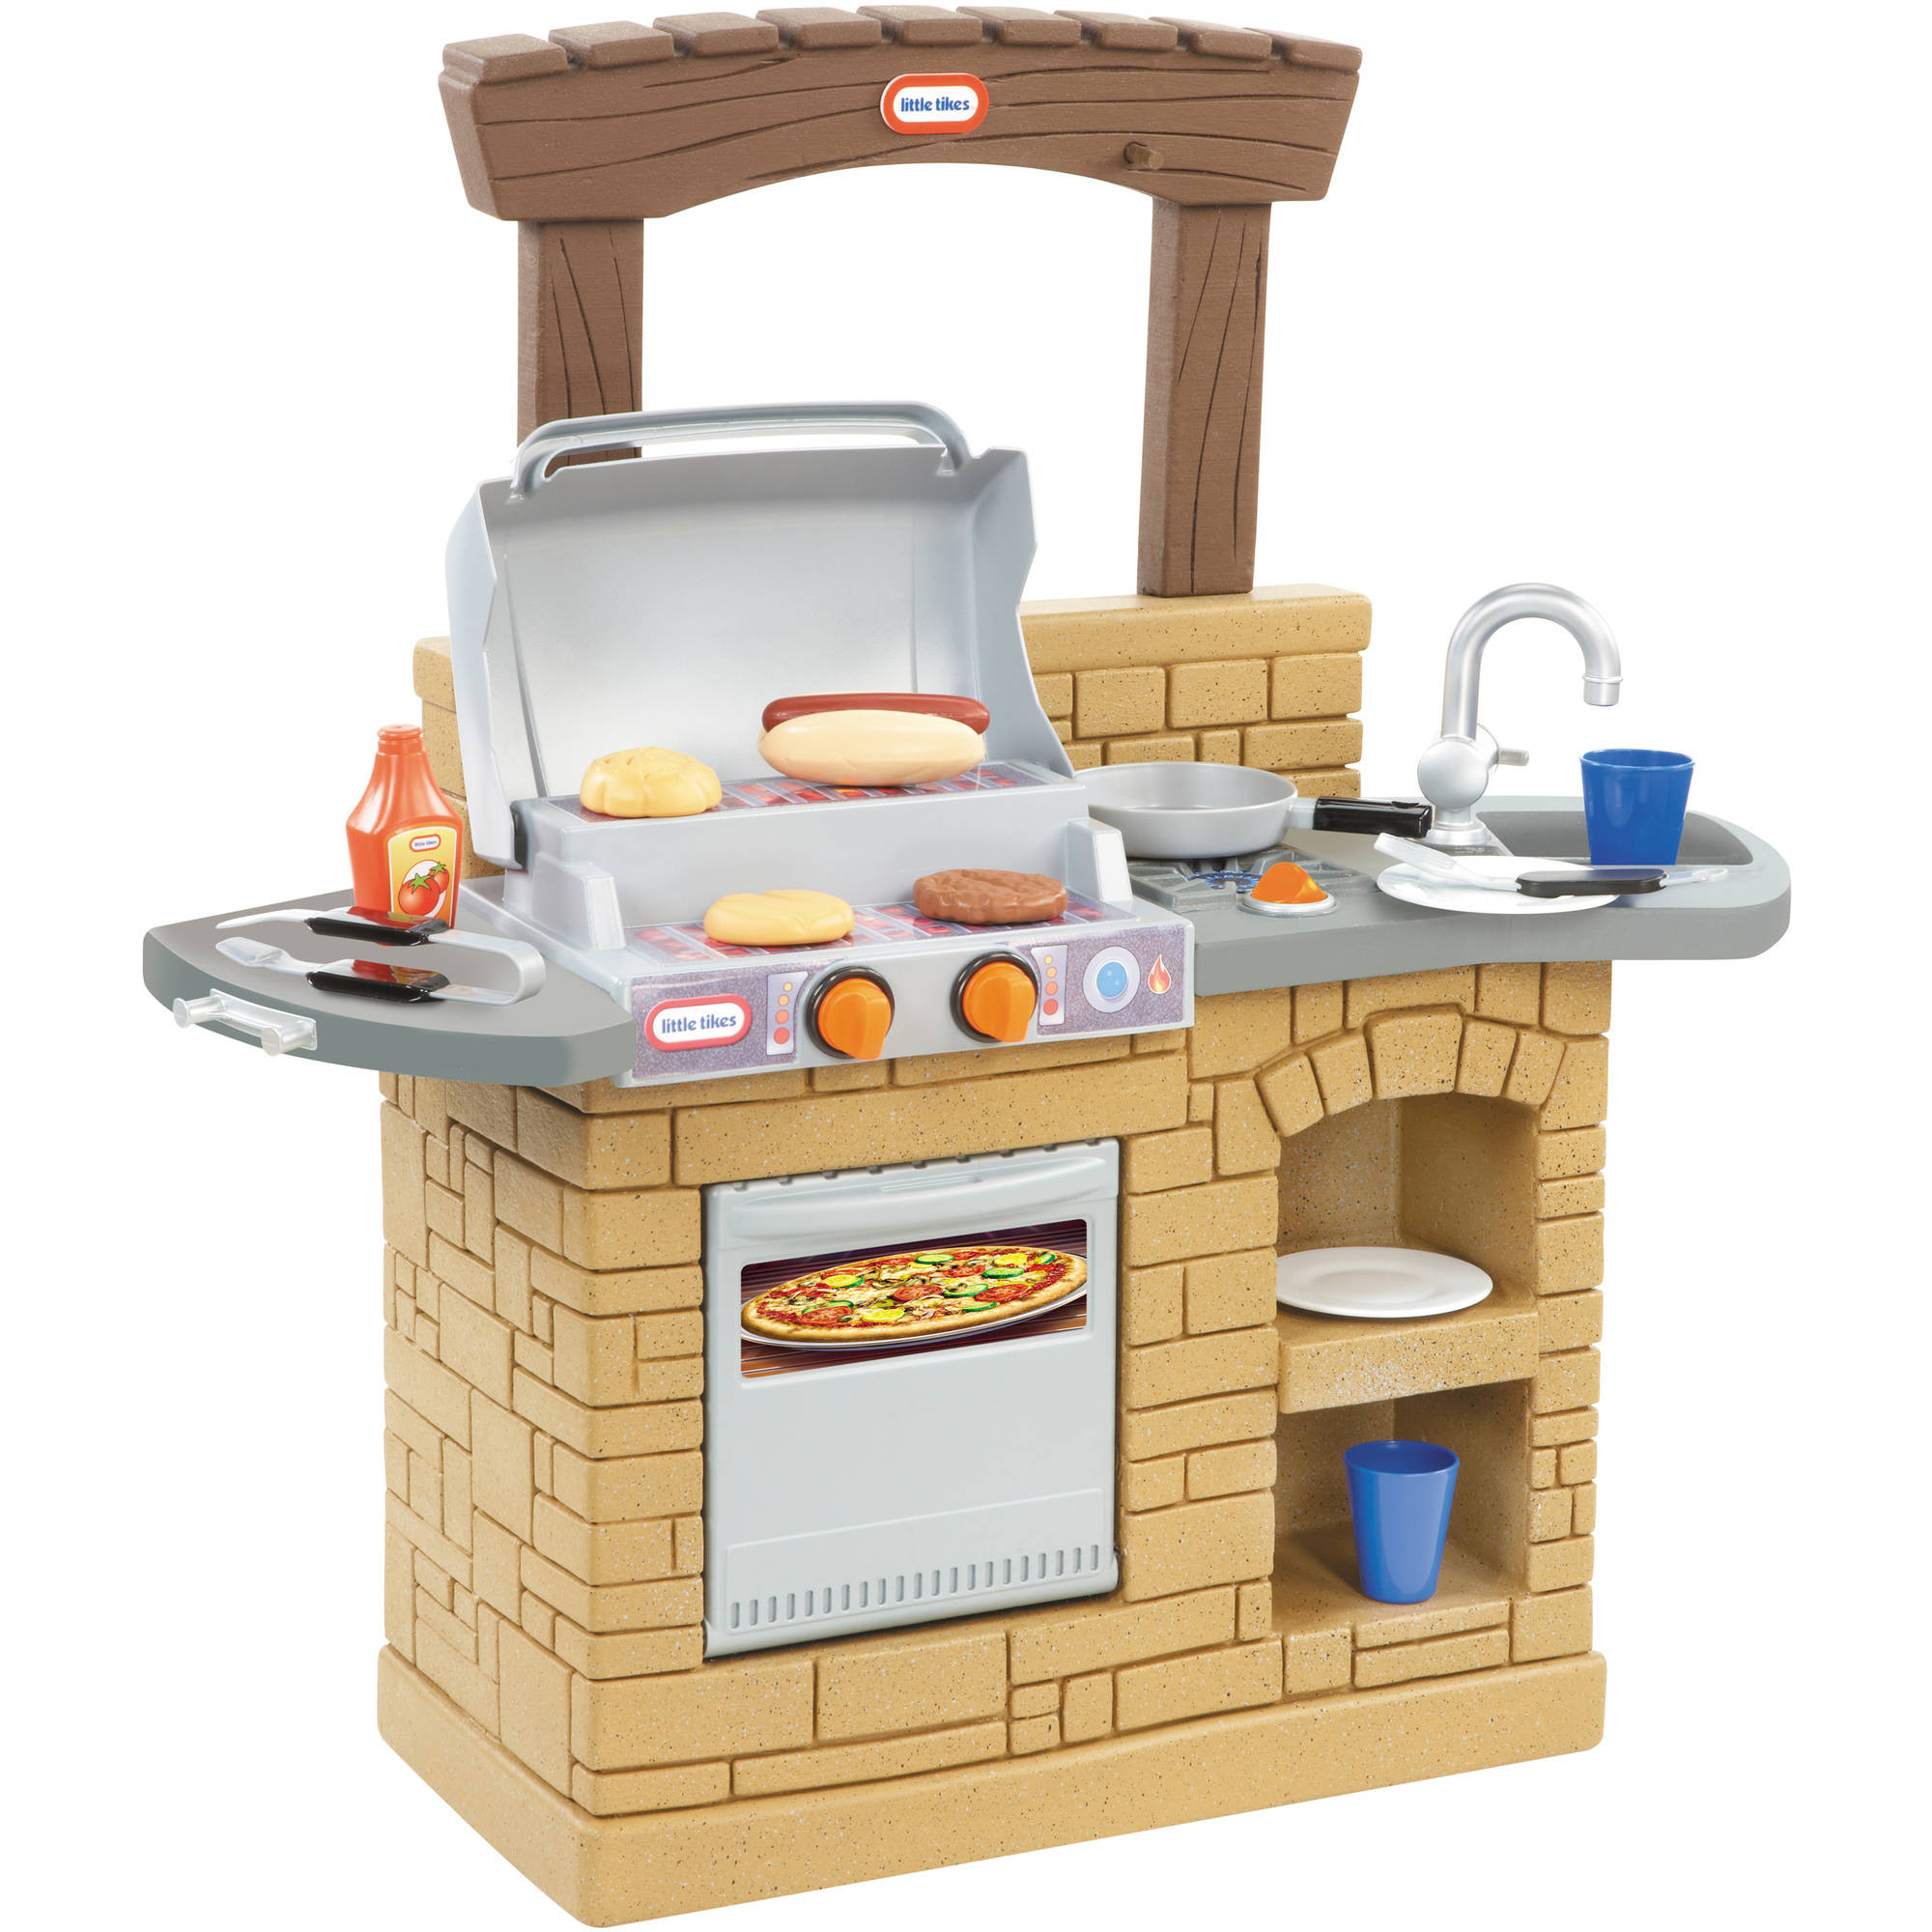 Little Tikes Backyard Barbeque
 Little Tikes Cook n Play Outdoor BBQ Grill Walmart